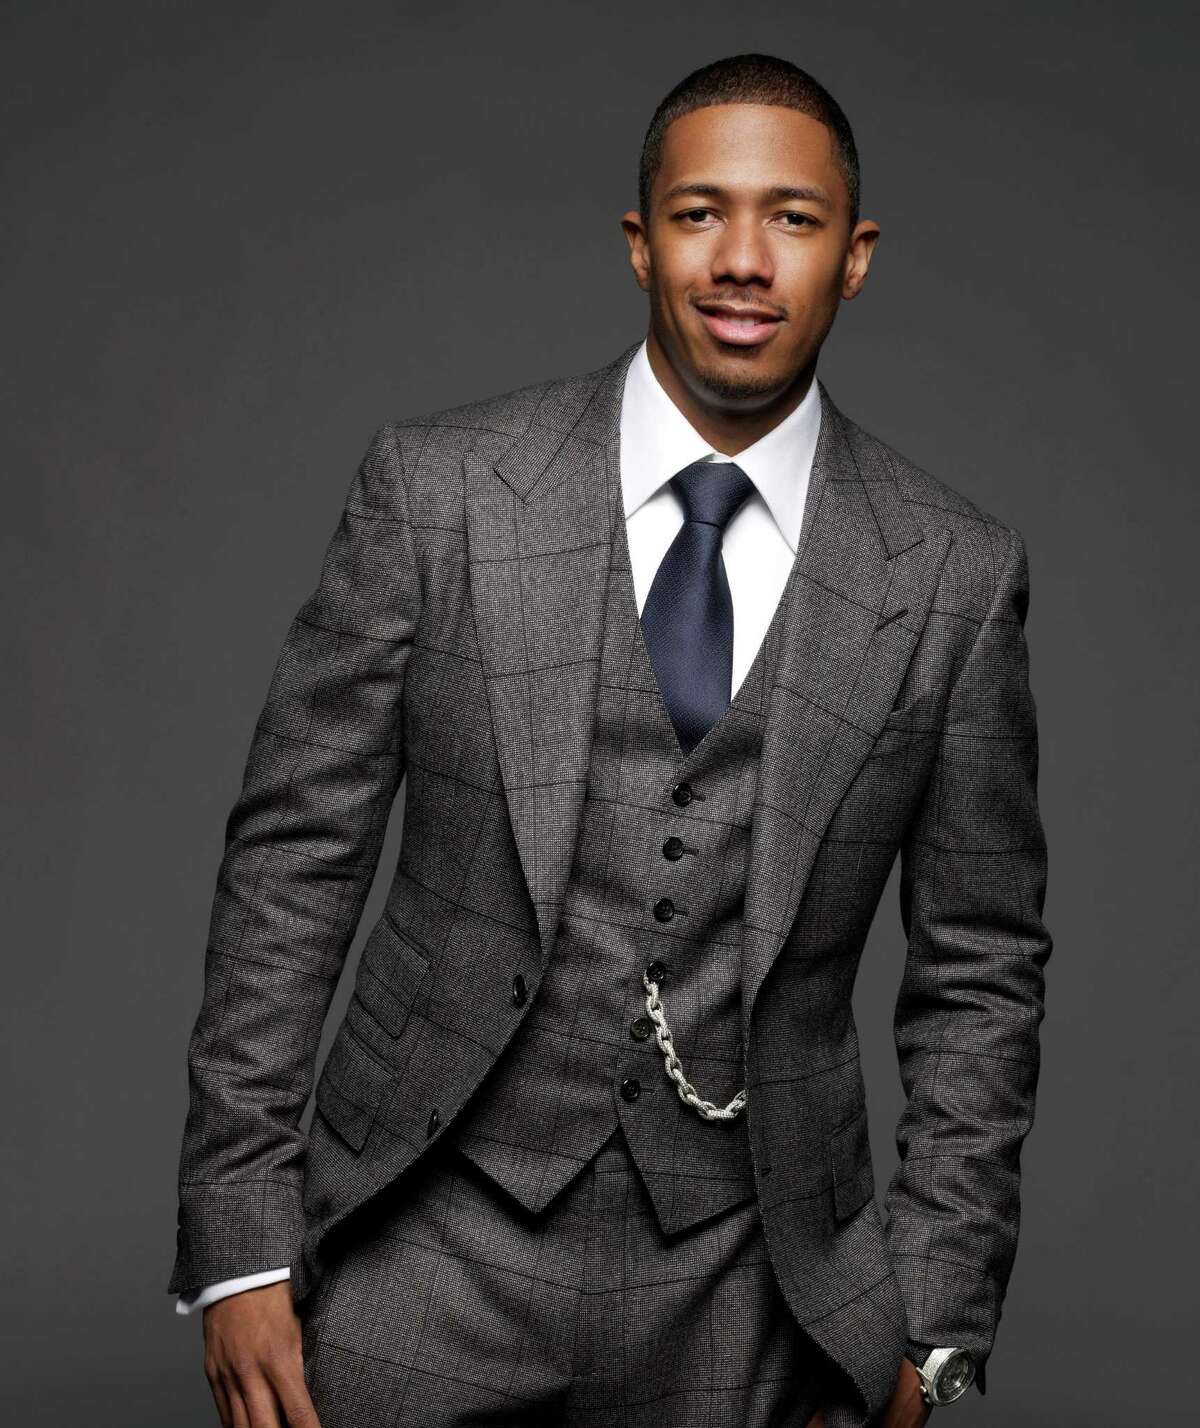 Entertainer Nick Cannon, seen here, and his “America’s Got Talent” co-star, Howie Mandel, will perform at Foxwoods Resort Casino on Saturday, April 9.